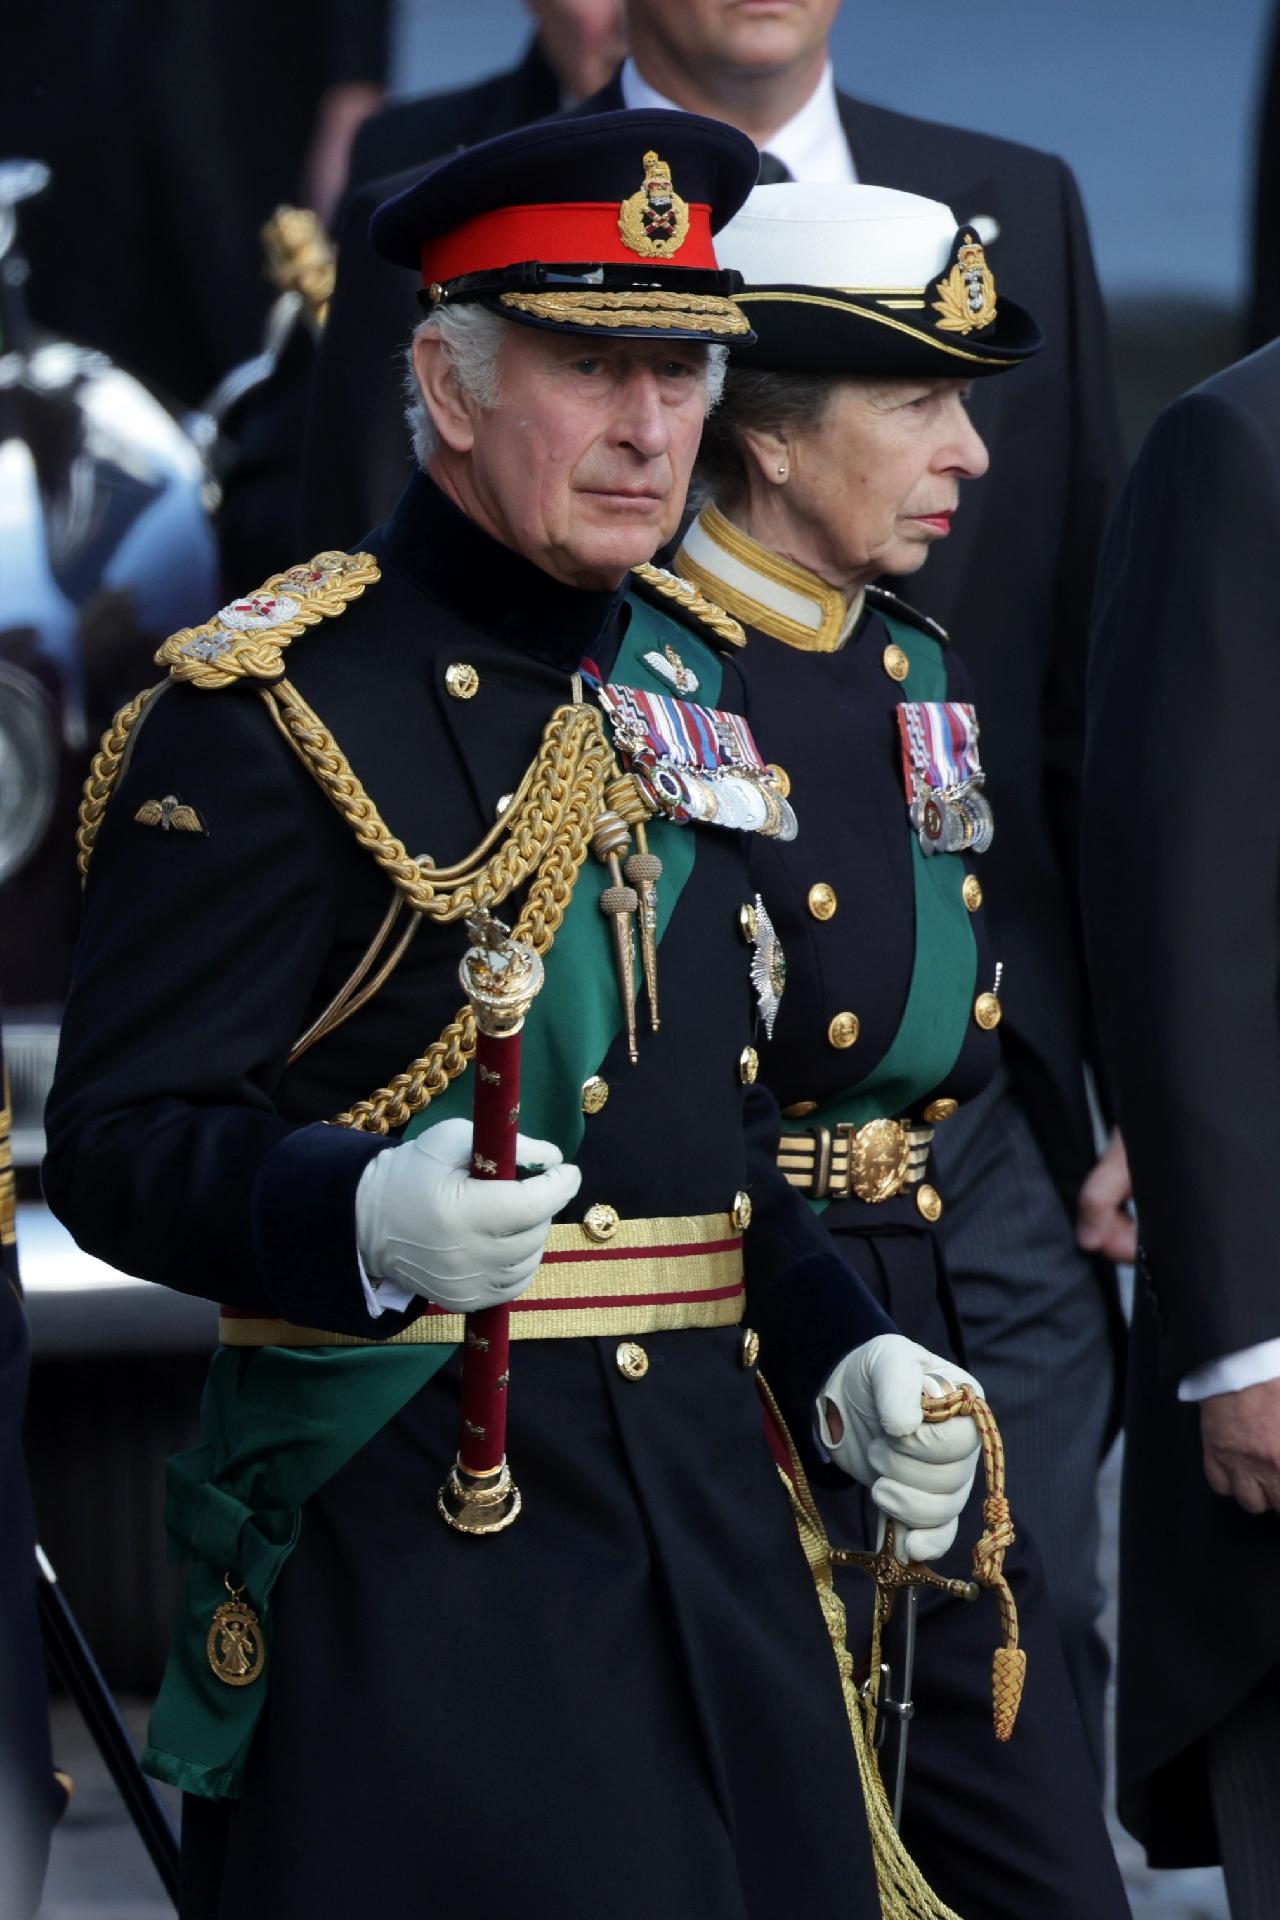 King Charles III accompanies the funeral procession of Queen Elizabeth II - Chris Jackson / Getty Images